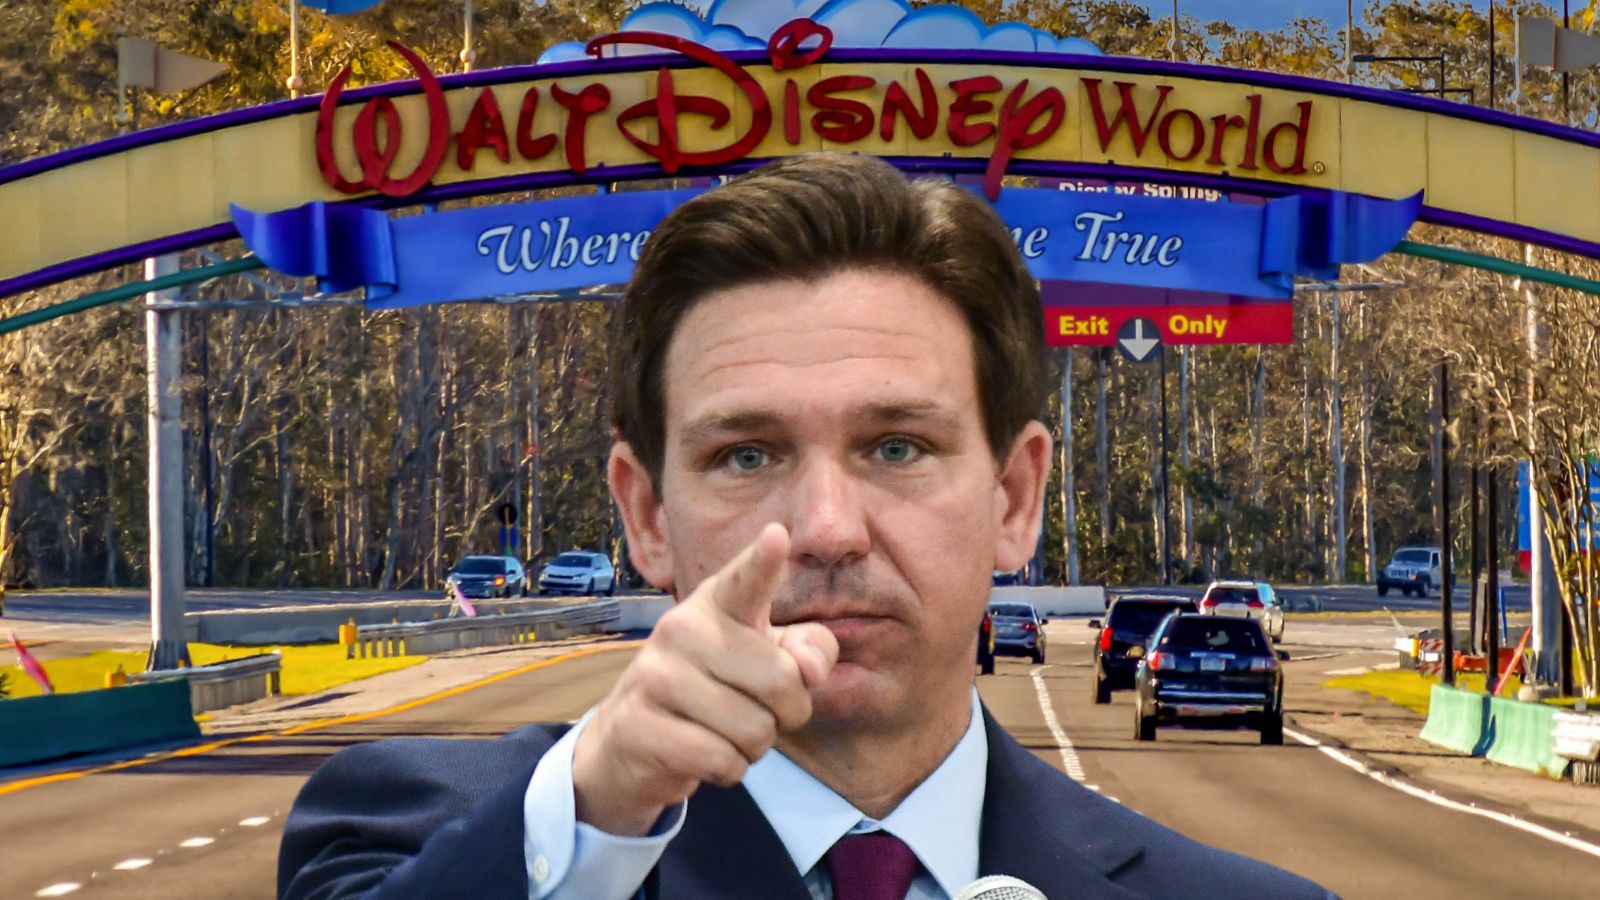 “Don’t Say Gay and Don’t Visit Florida”: Businesses and Tourists Turn Backs on Florida Over Ron DeSantis’ Policies